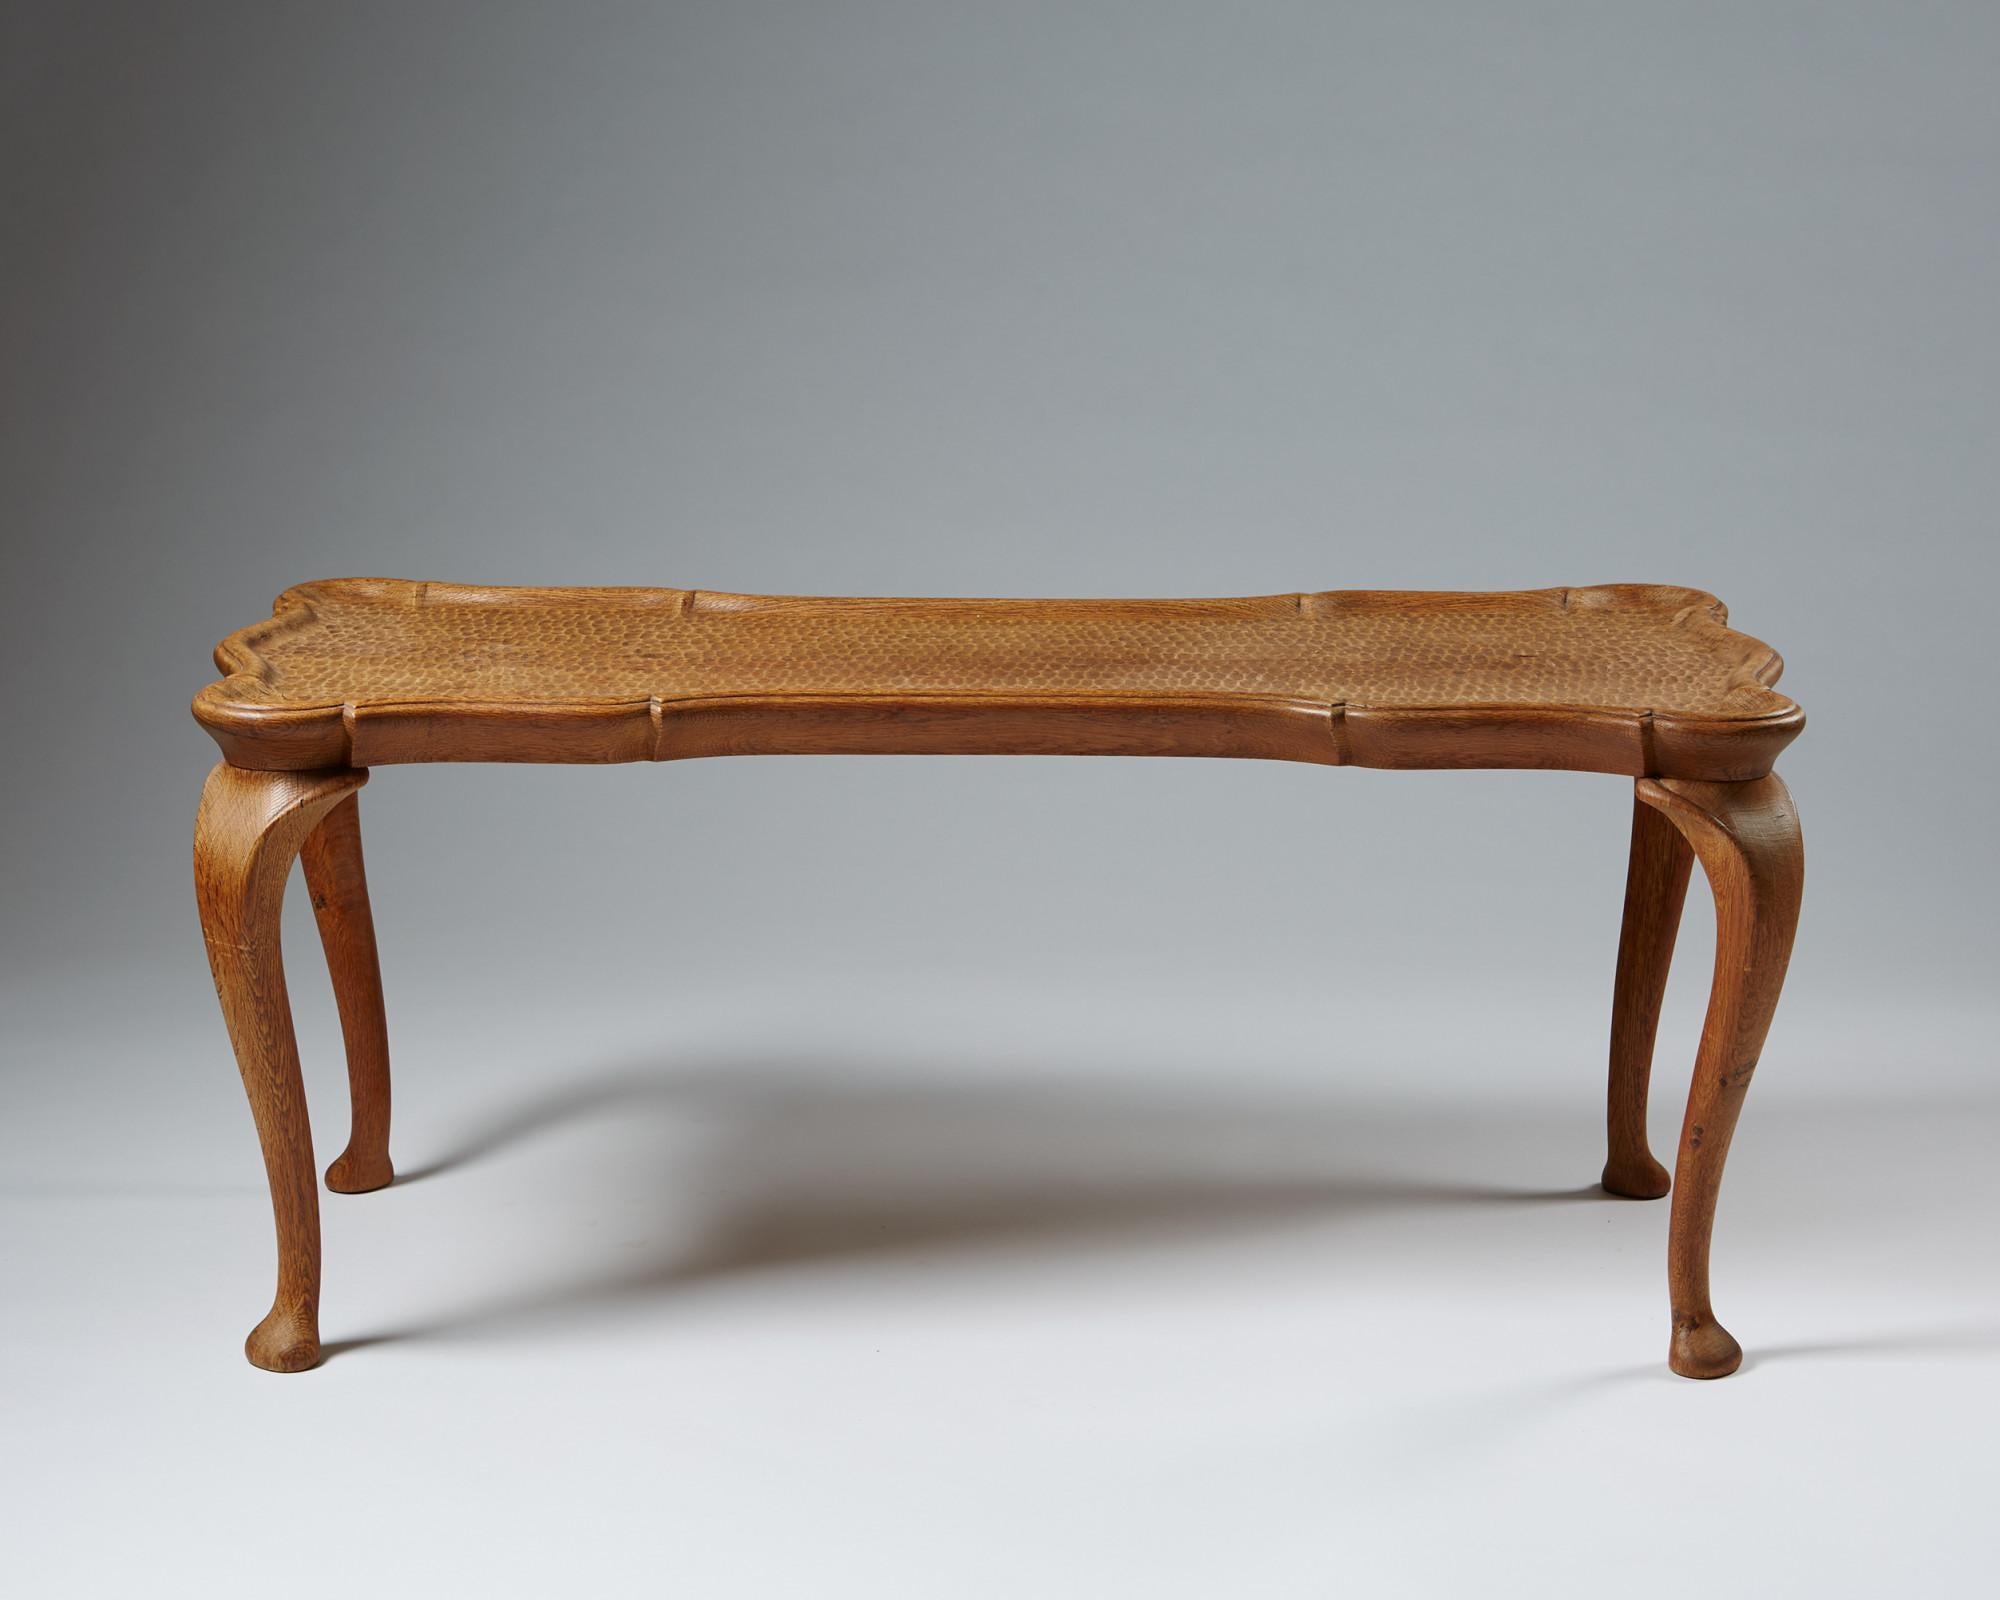 Occasional table attributed to Frits Henningsen,
Denmark 1940s.

Solid hand carved oak.

Measurements:
L: 140 cm / 4' 7''
D: 53 cm / 21''
H: 53 cm / 21''
 